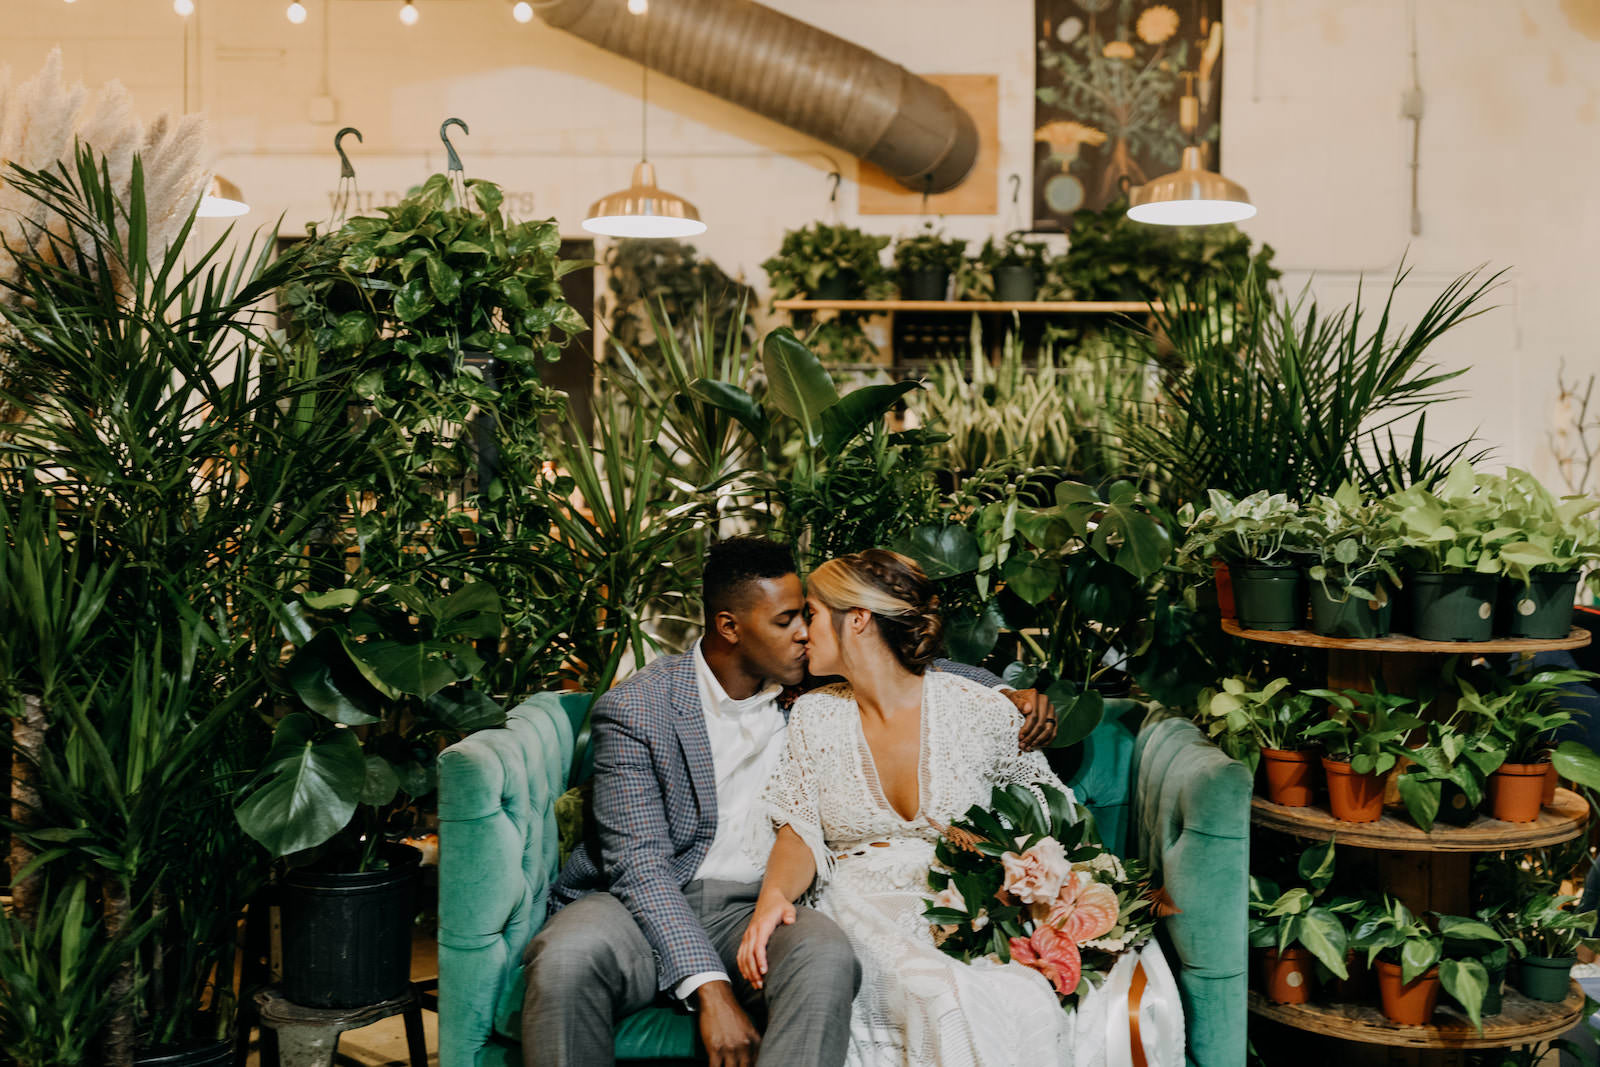 Boho Neutral Styled Shoot | Bride in Vintage Lace Fringe Short Sleeve V Neckline Wedding Dress Holding Tropical Inspired Floral Bouquet with Monstera Palm Leaf, Pink Anthurium Ivory Roses, Groom in Blue Plaid Suit with Greenery Plants | Unique St. Pete Wedding Venue Wild Roots Nursery | Amber McWhorter Photography